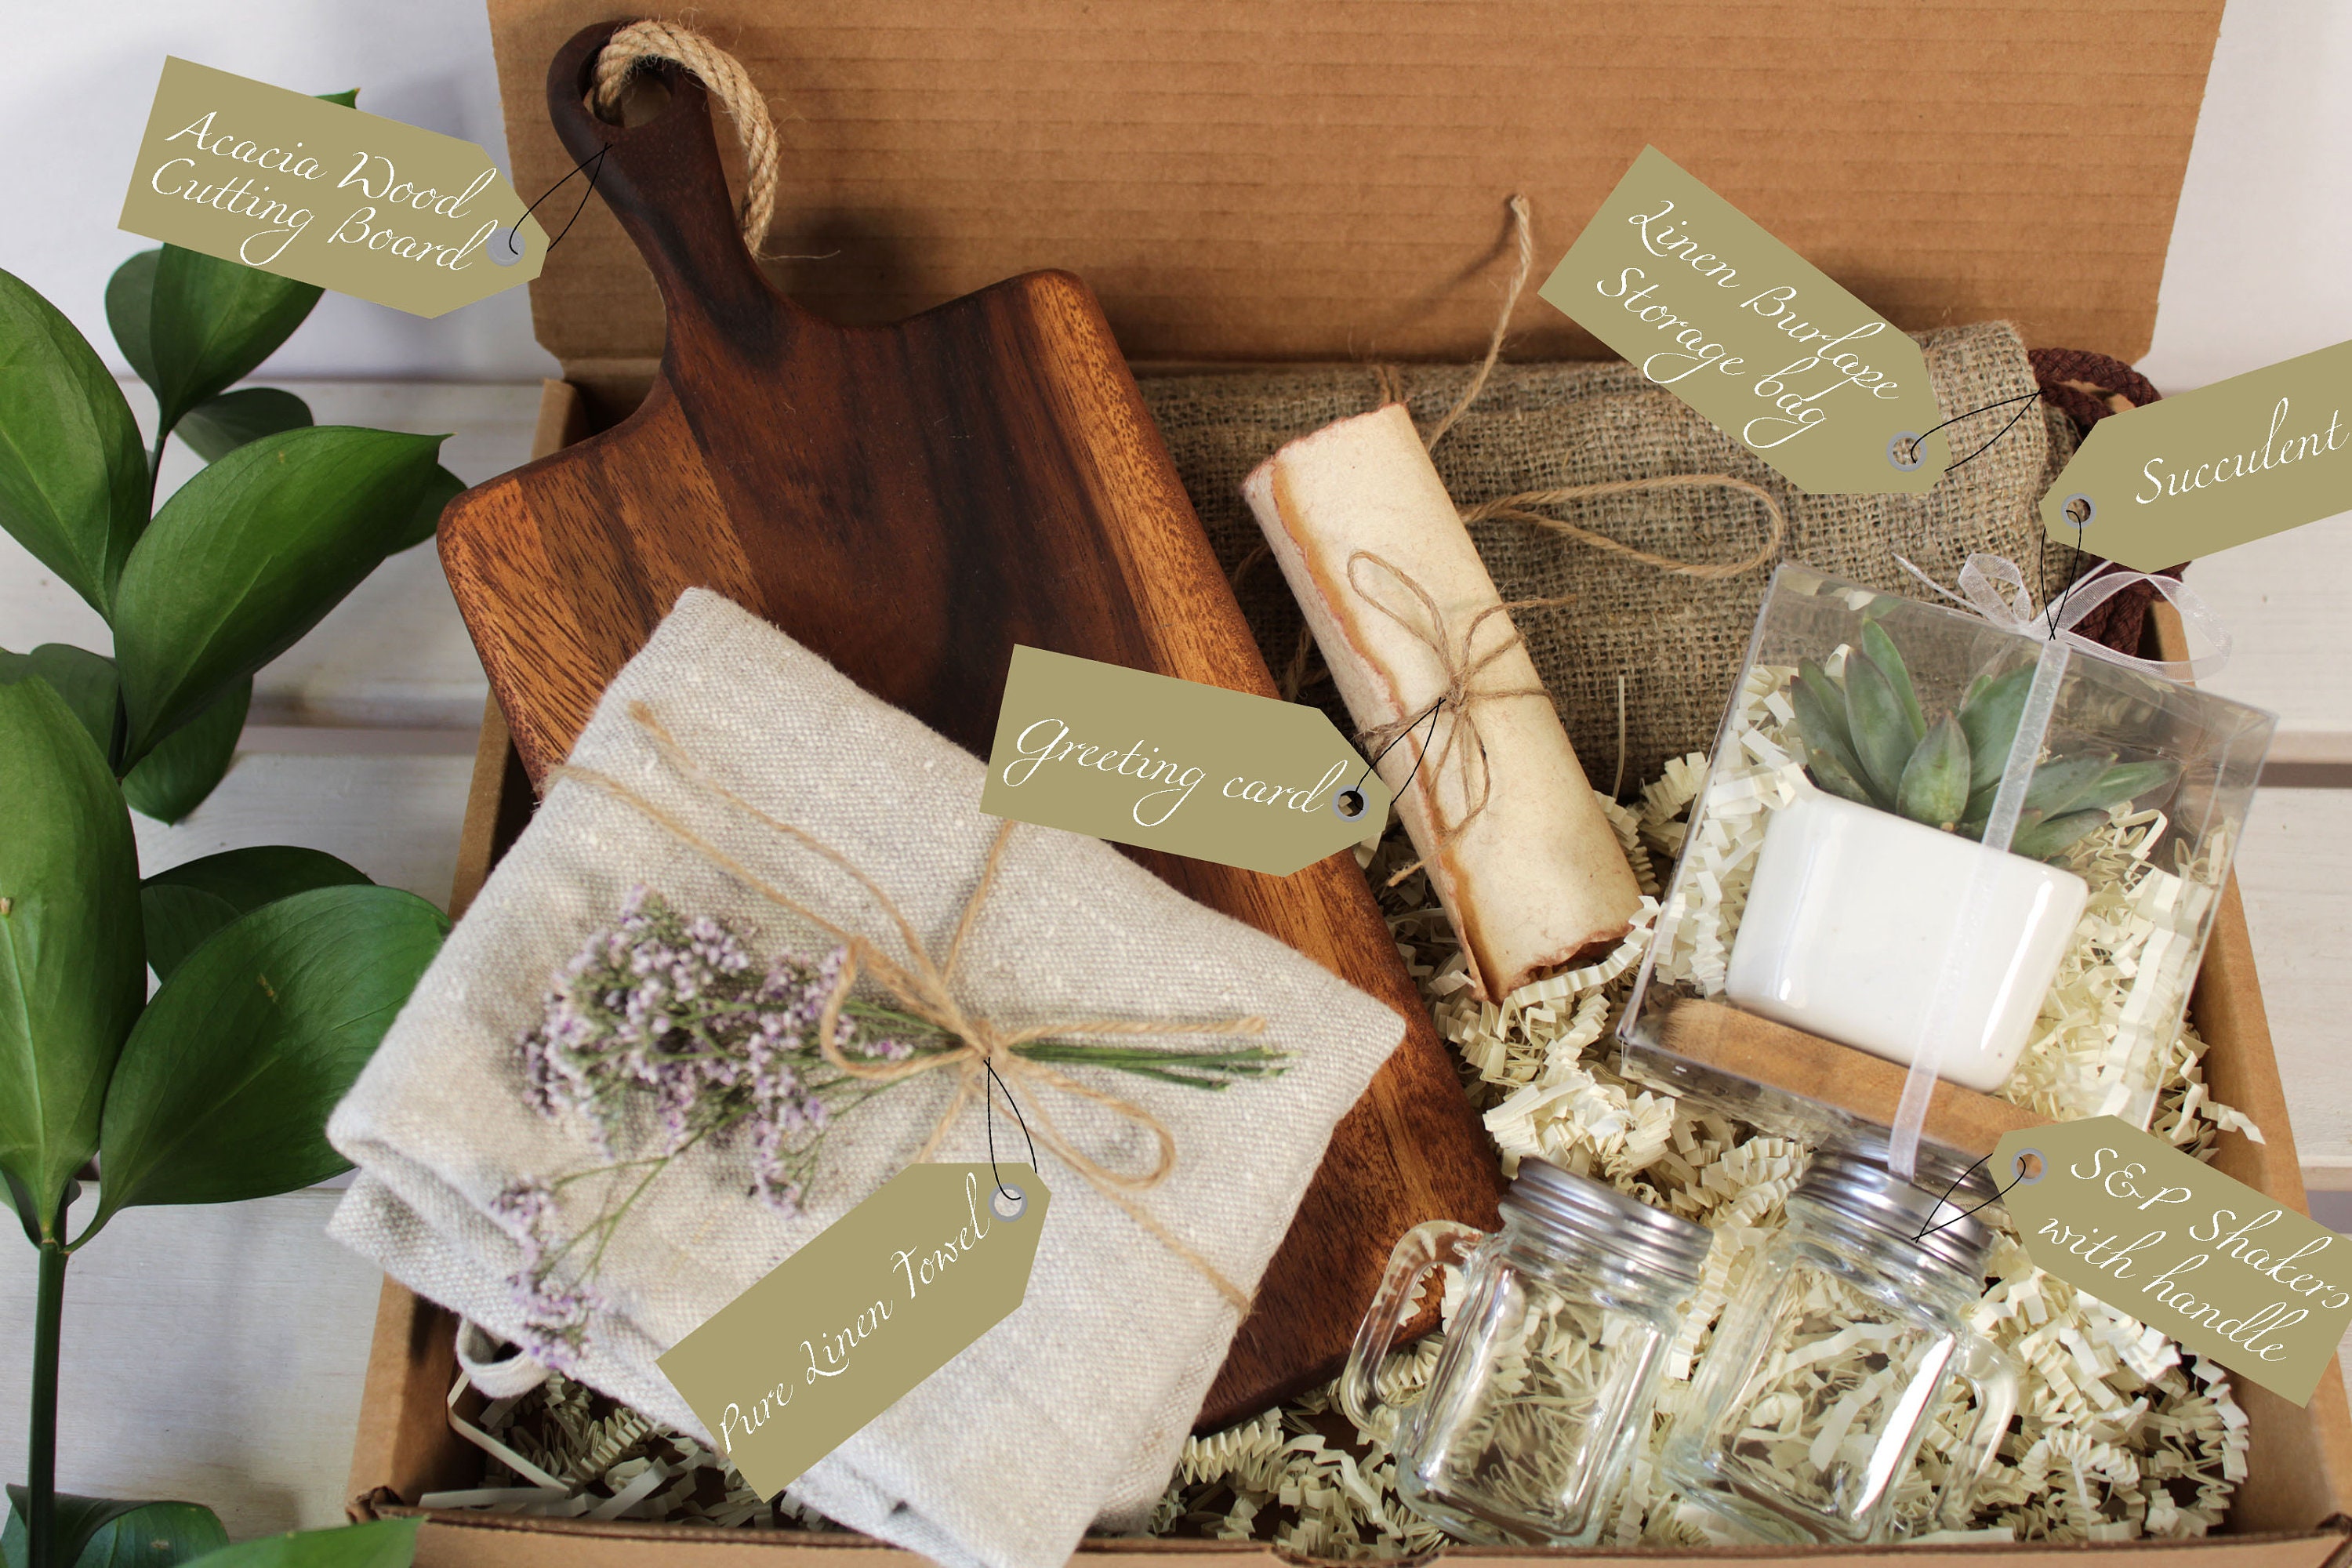 New Home Gift Box, All Natural Kitchen Gift Box, House Warming